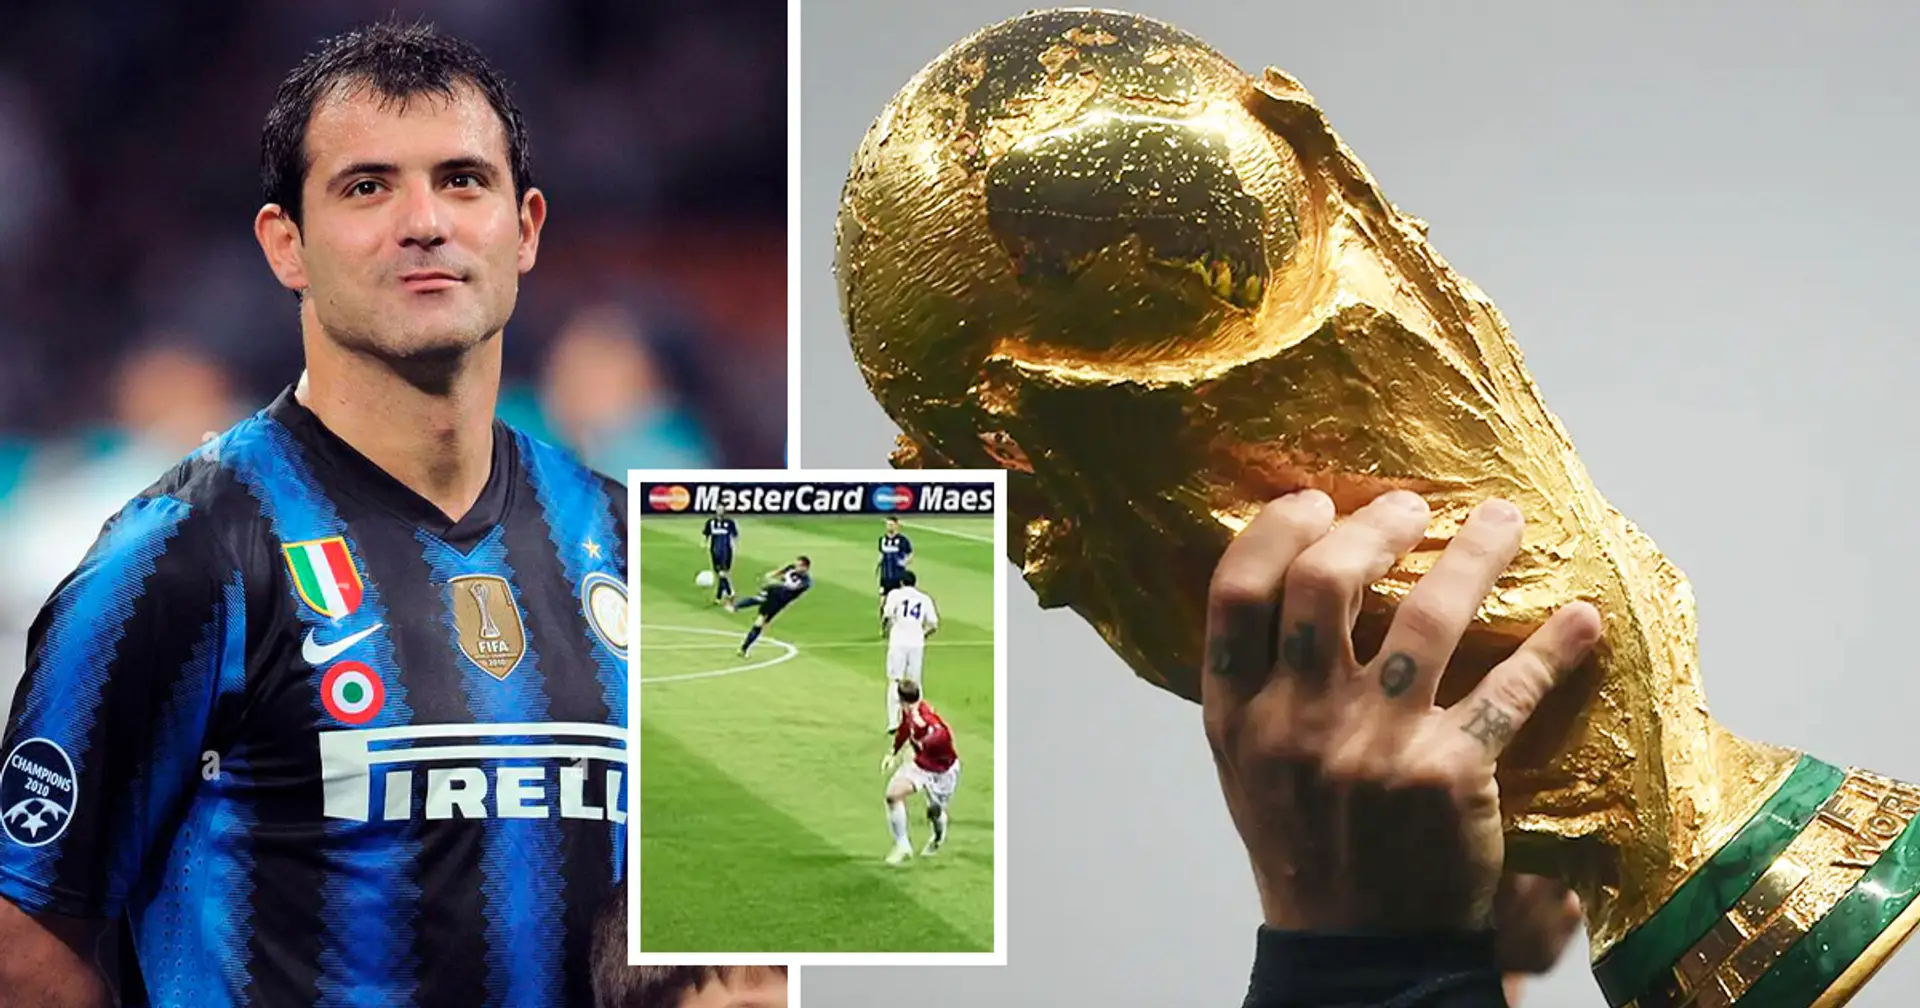 Stankovic is the only player who played at three World Cups with three different countries. How did that happen?